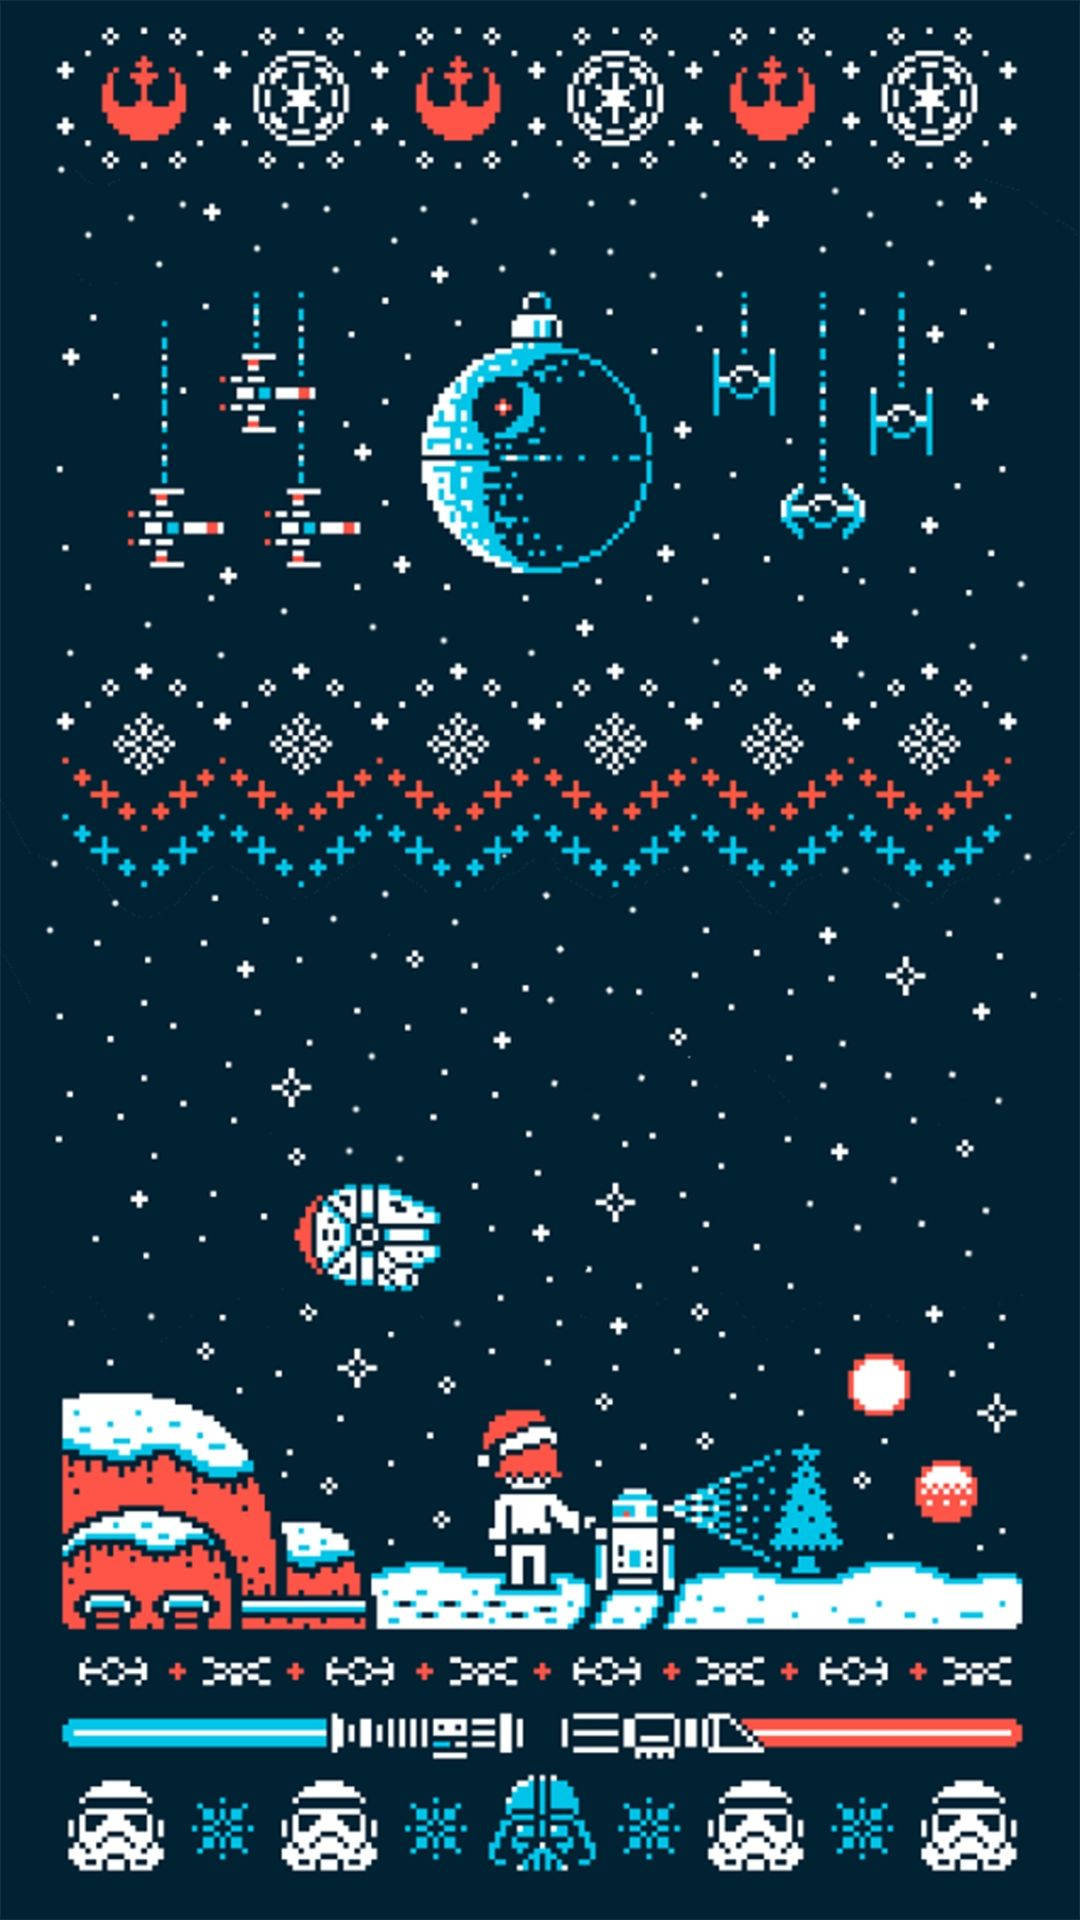 Celebrate Your Intergalactic Holiday This Year With A Star Wars Christmas Background